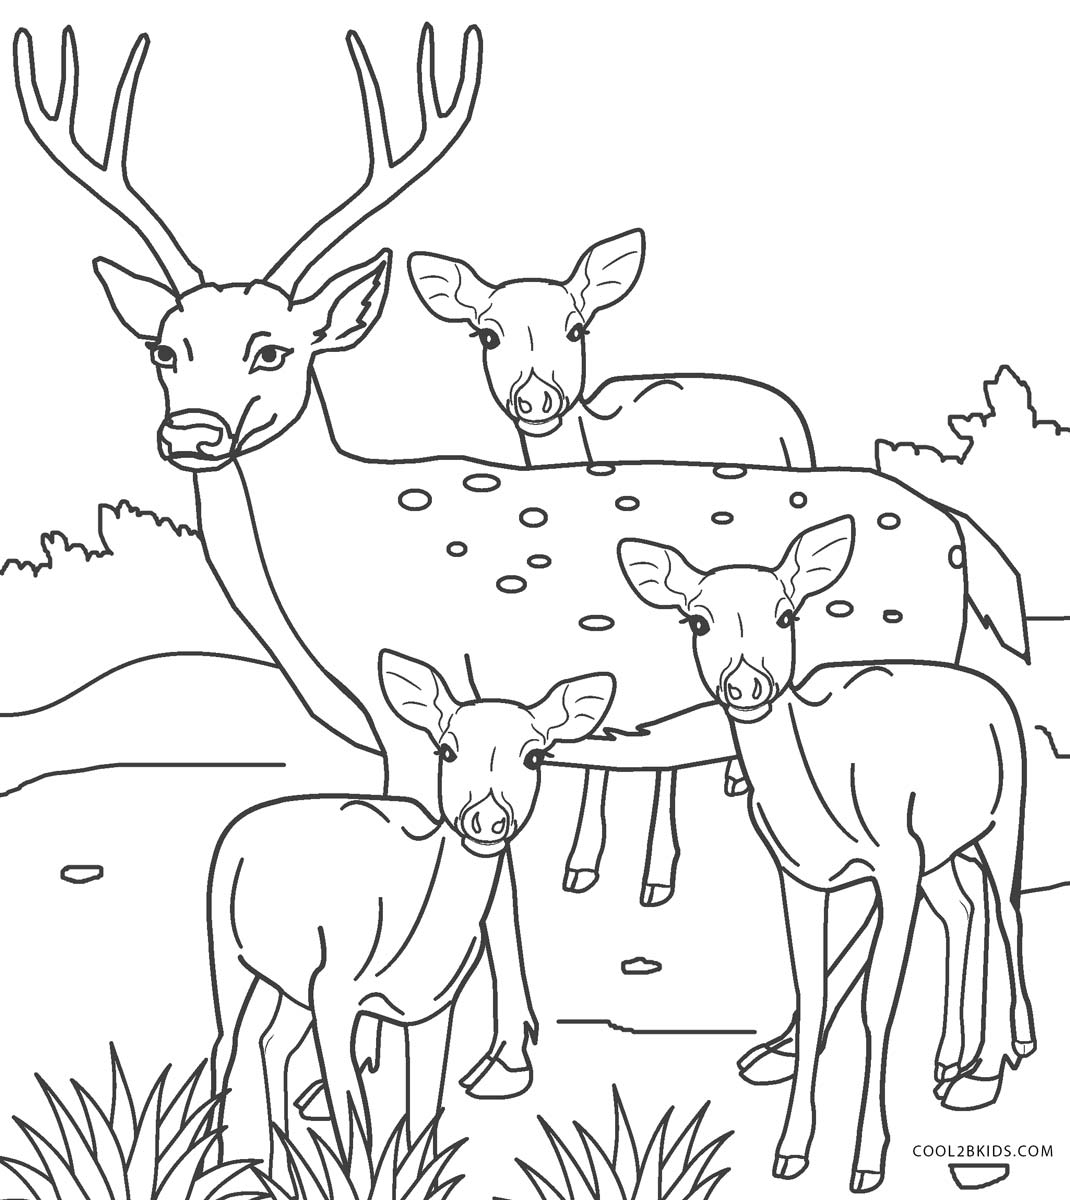 Dive Into Chortle-evoking Deer Coloring Congratulating Be in Tune with ...